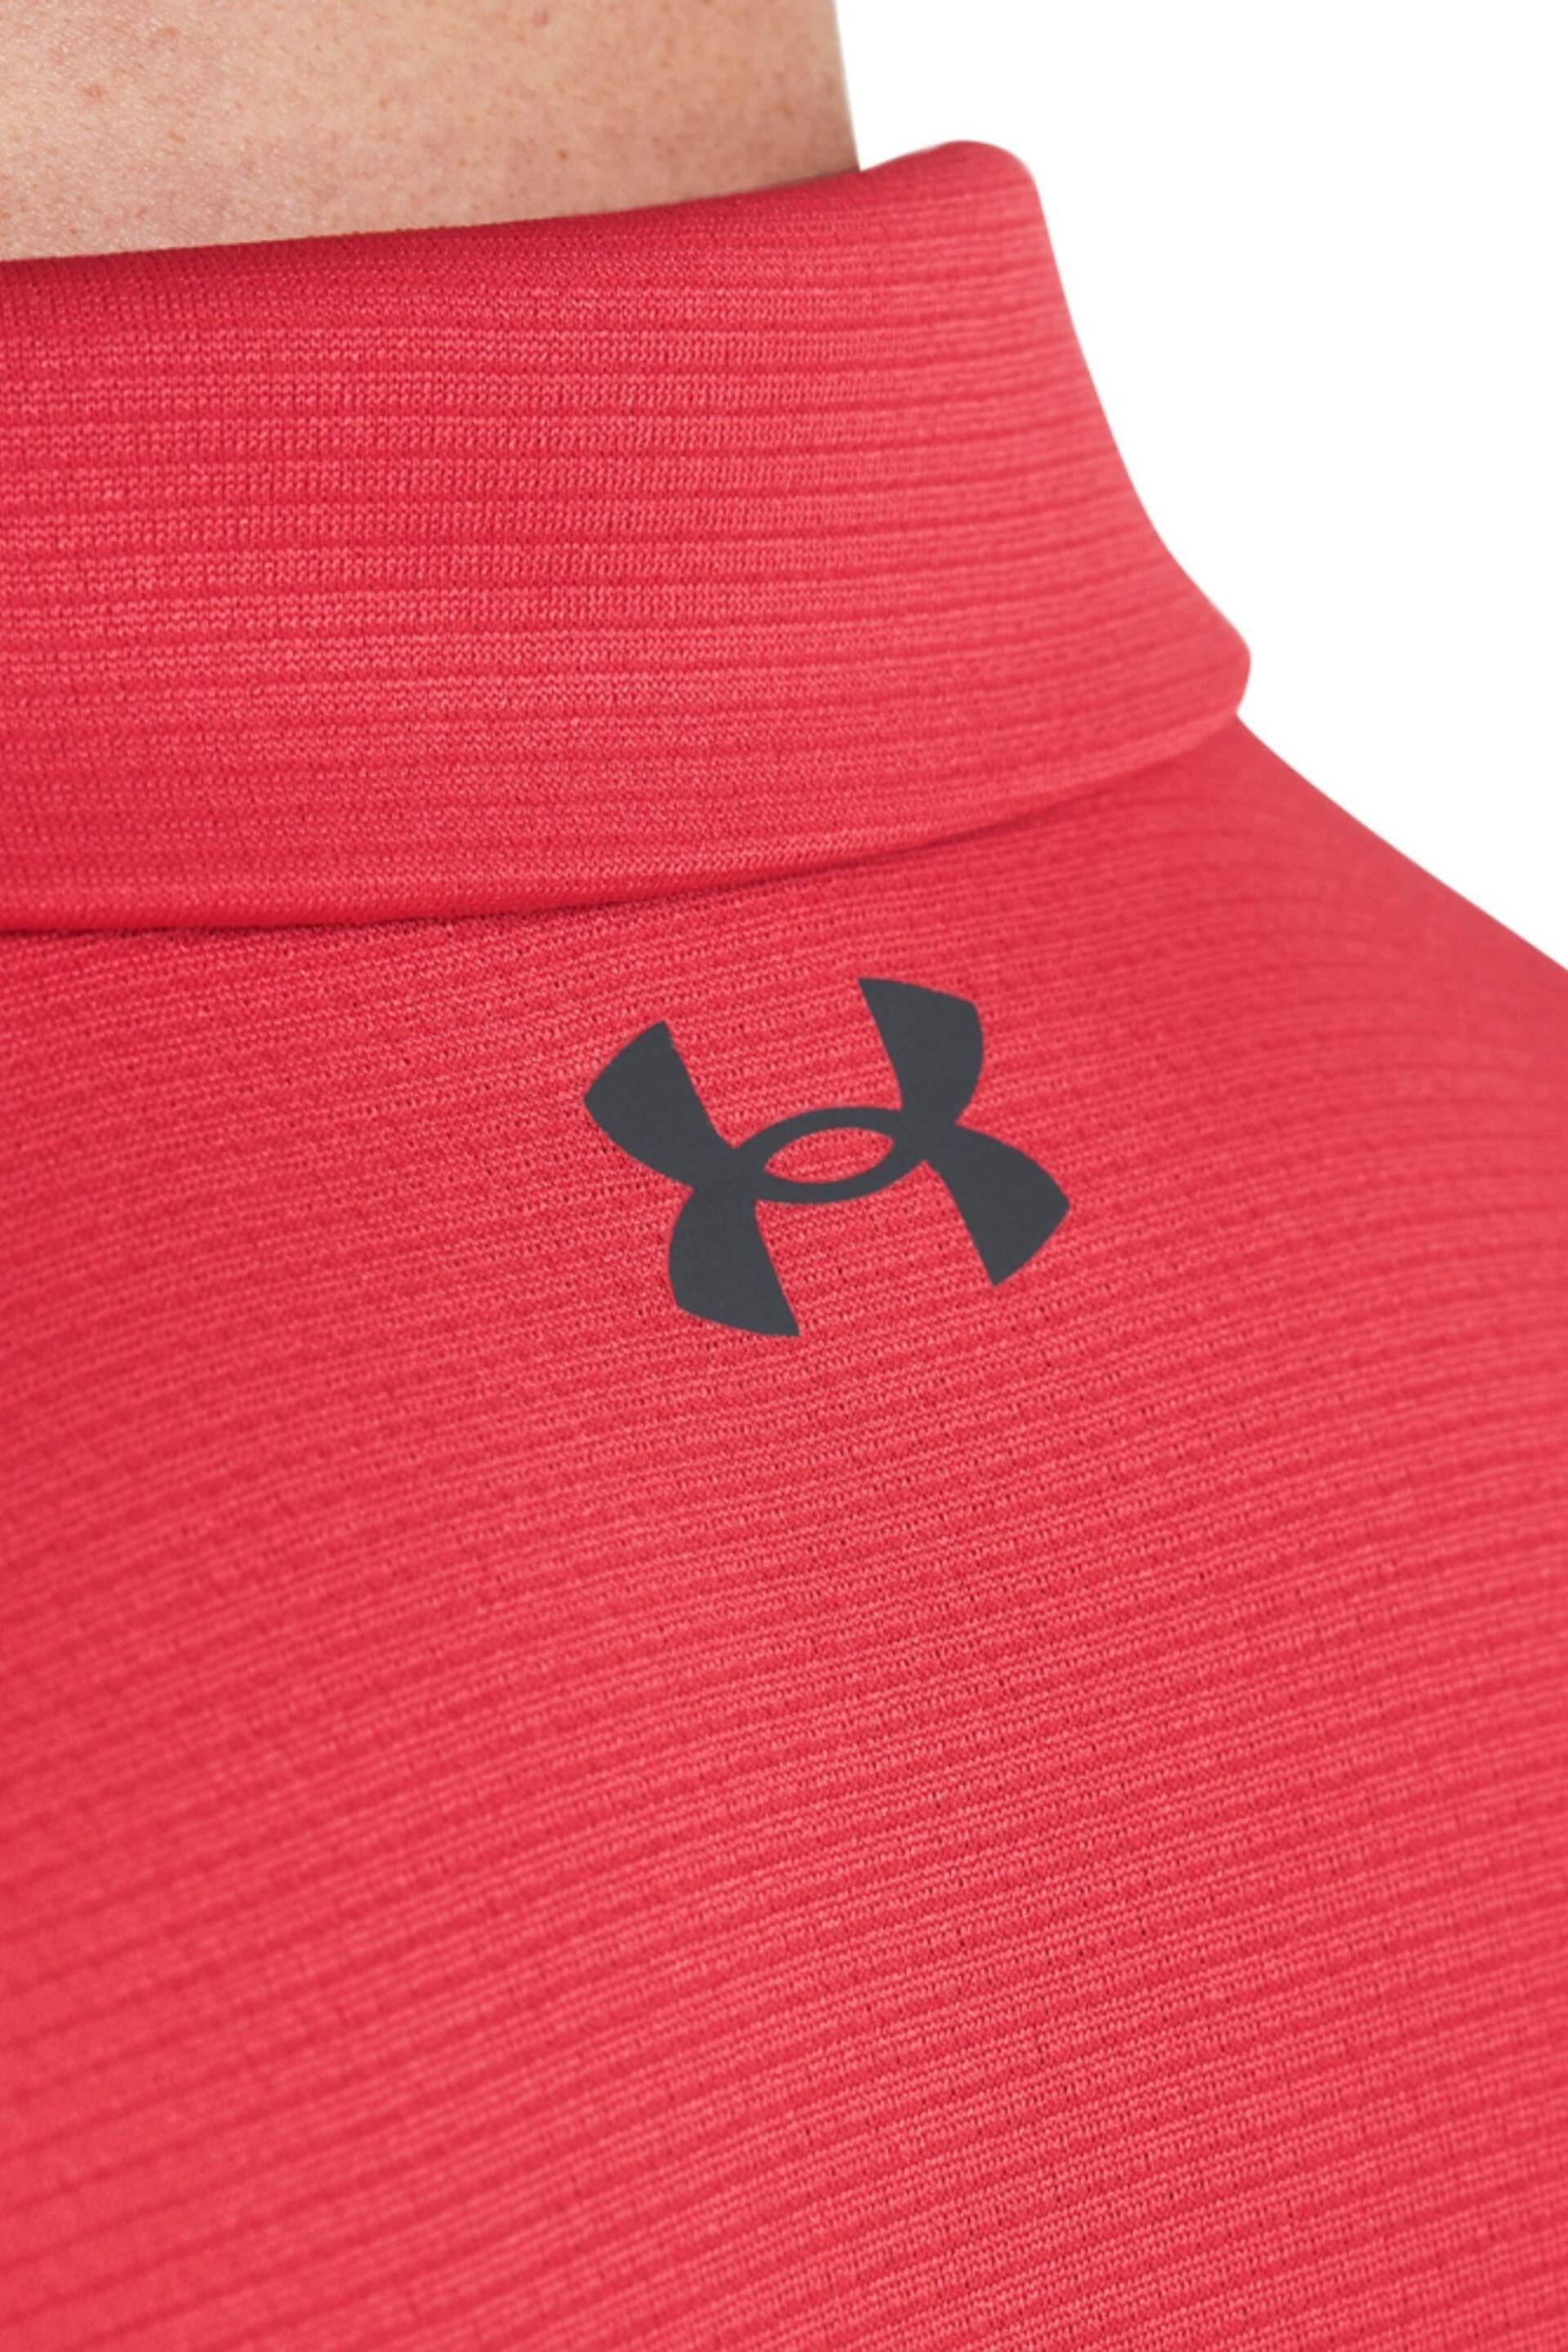 Under Armour Red/Grey Navy/Golf Tech Polo Shirt - Image 3 of 5